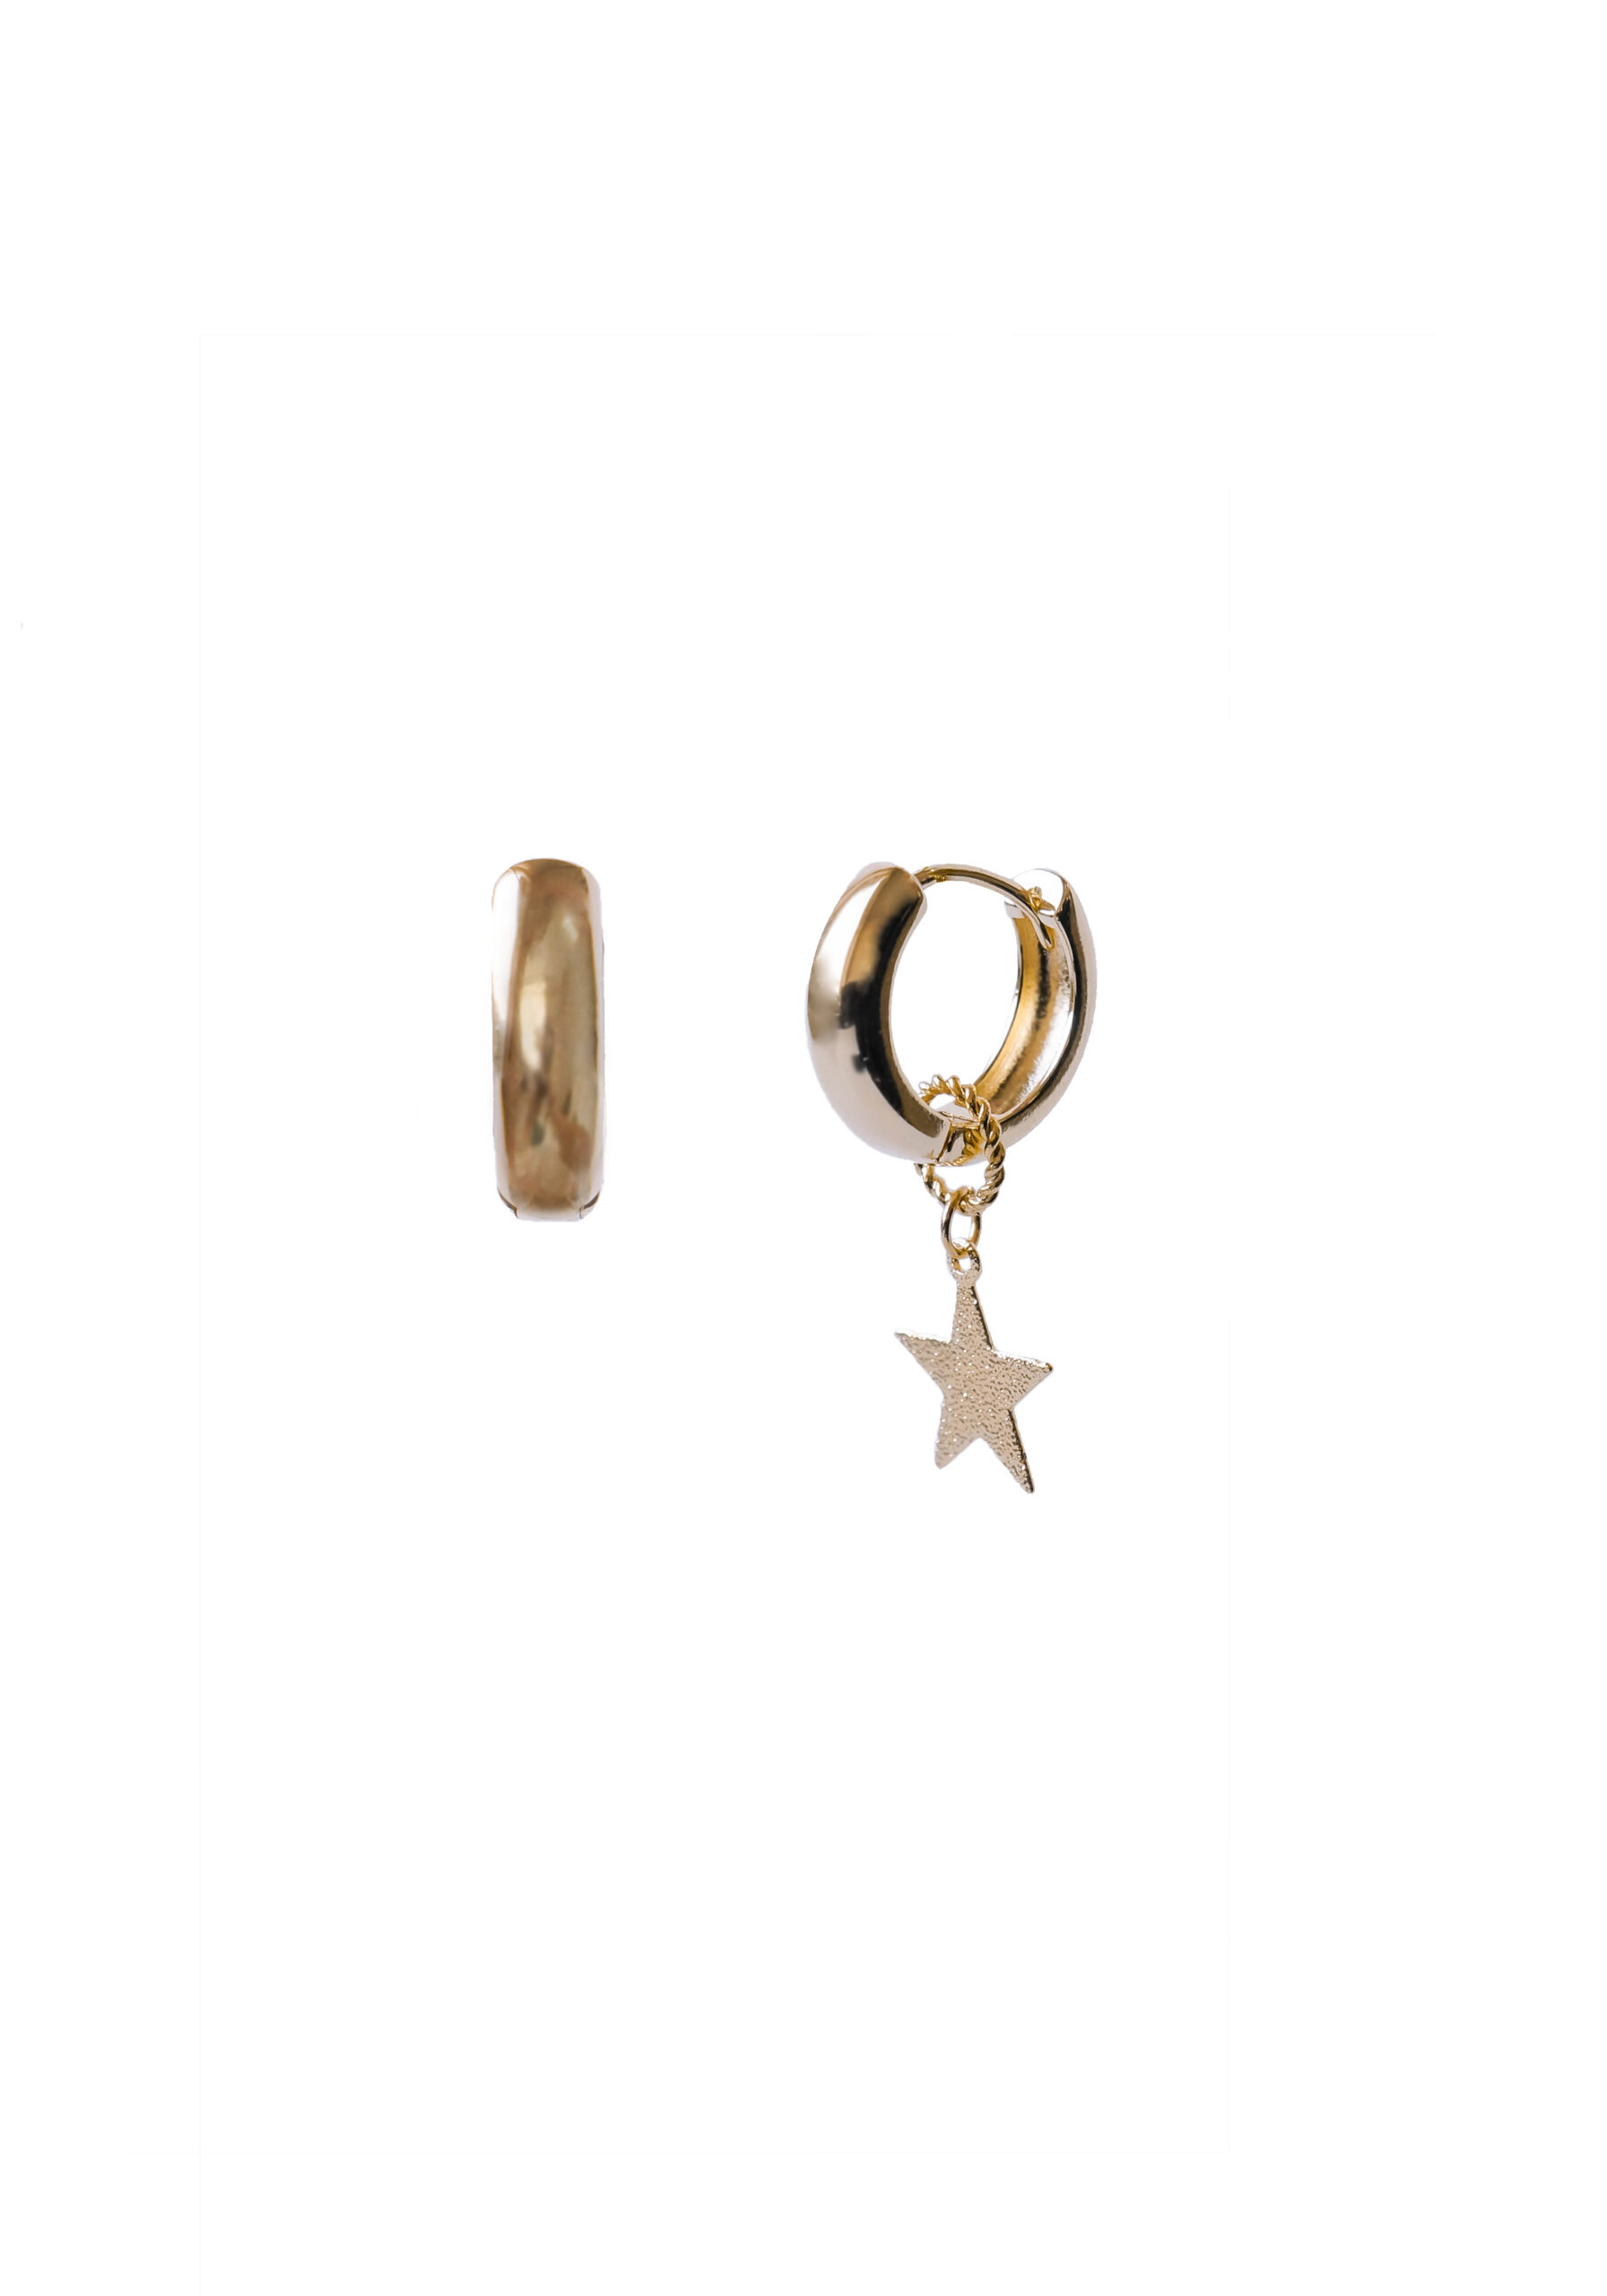 Gold plated hoop earrings with removable star pendant - GG Unique